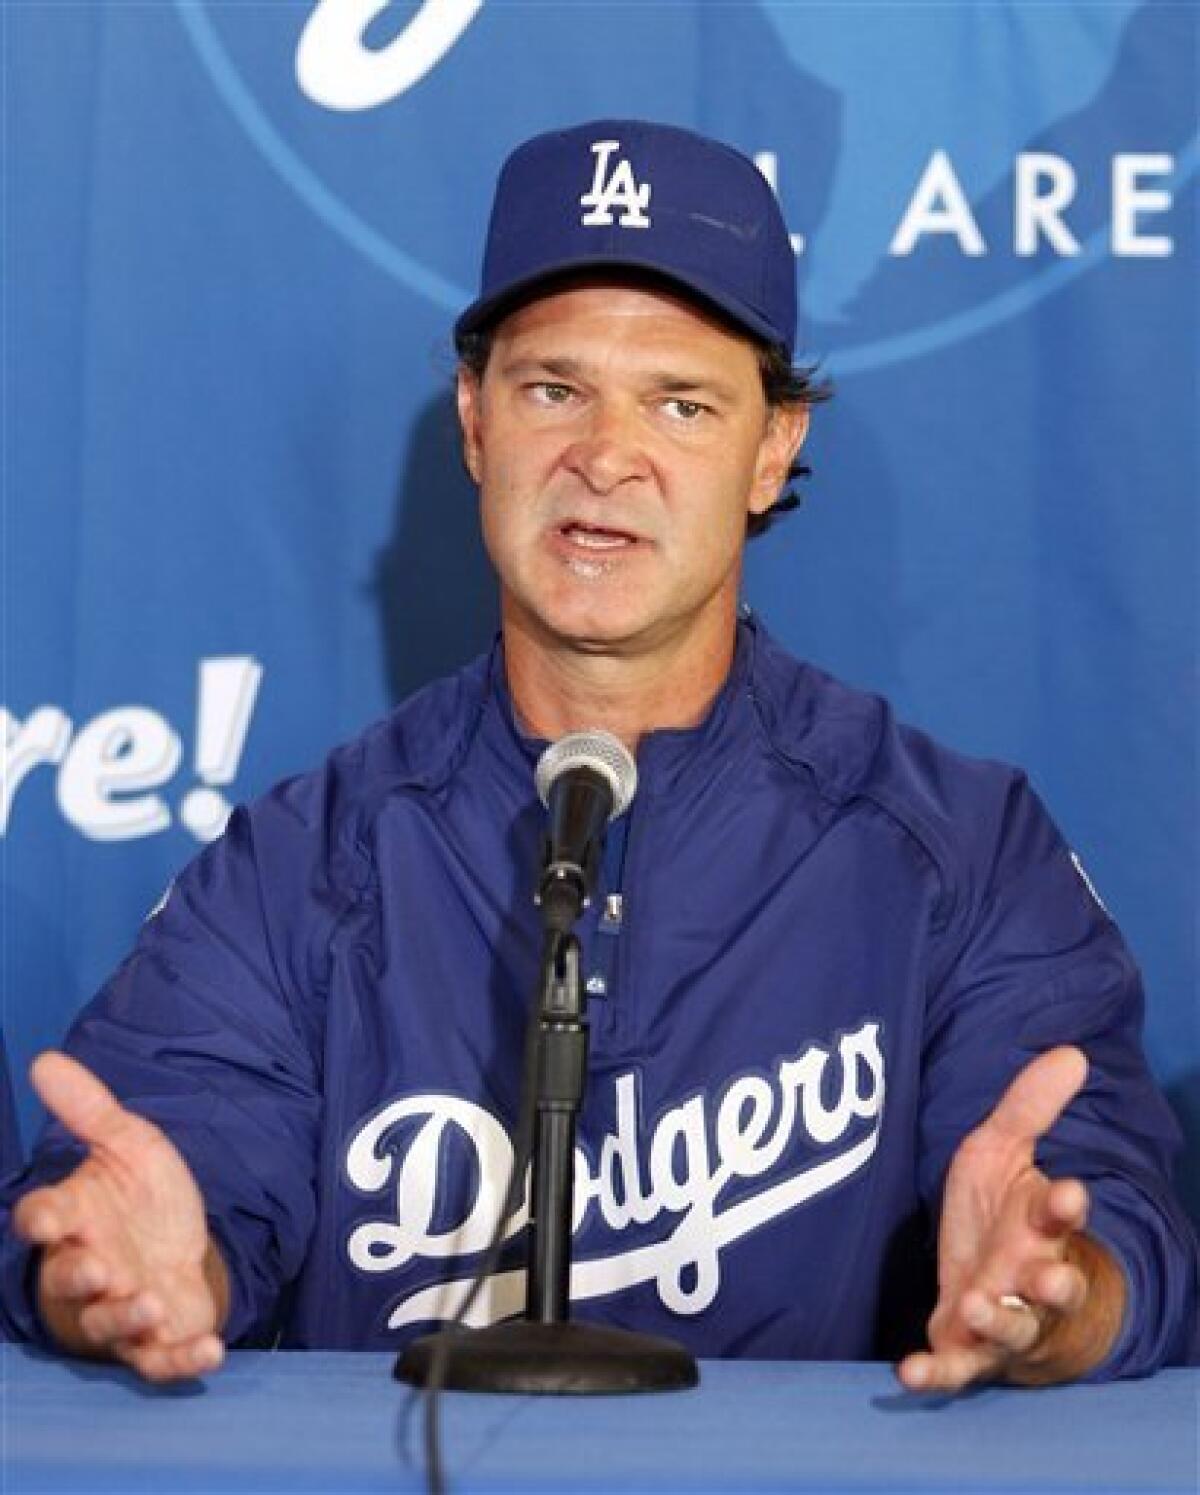 Photo: Joe Torre announces retirement as Dodgers manager and will be  replaced by Don Mattingly in Los Angeles. - LAP2010091701 